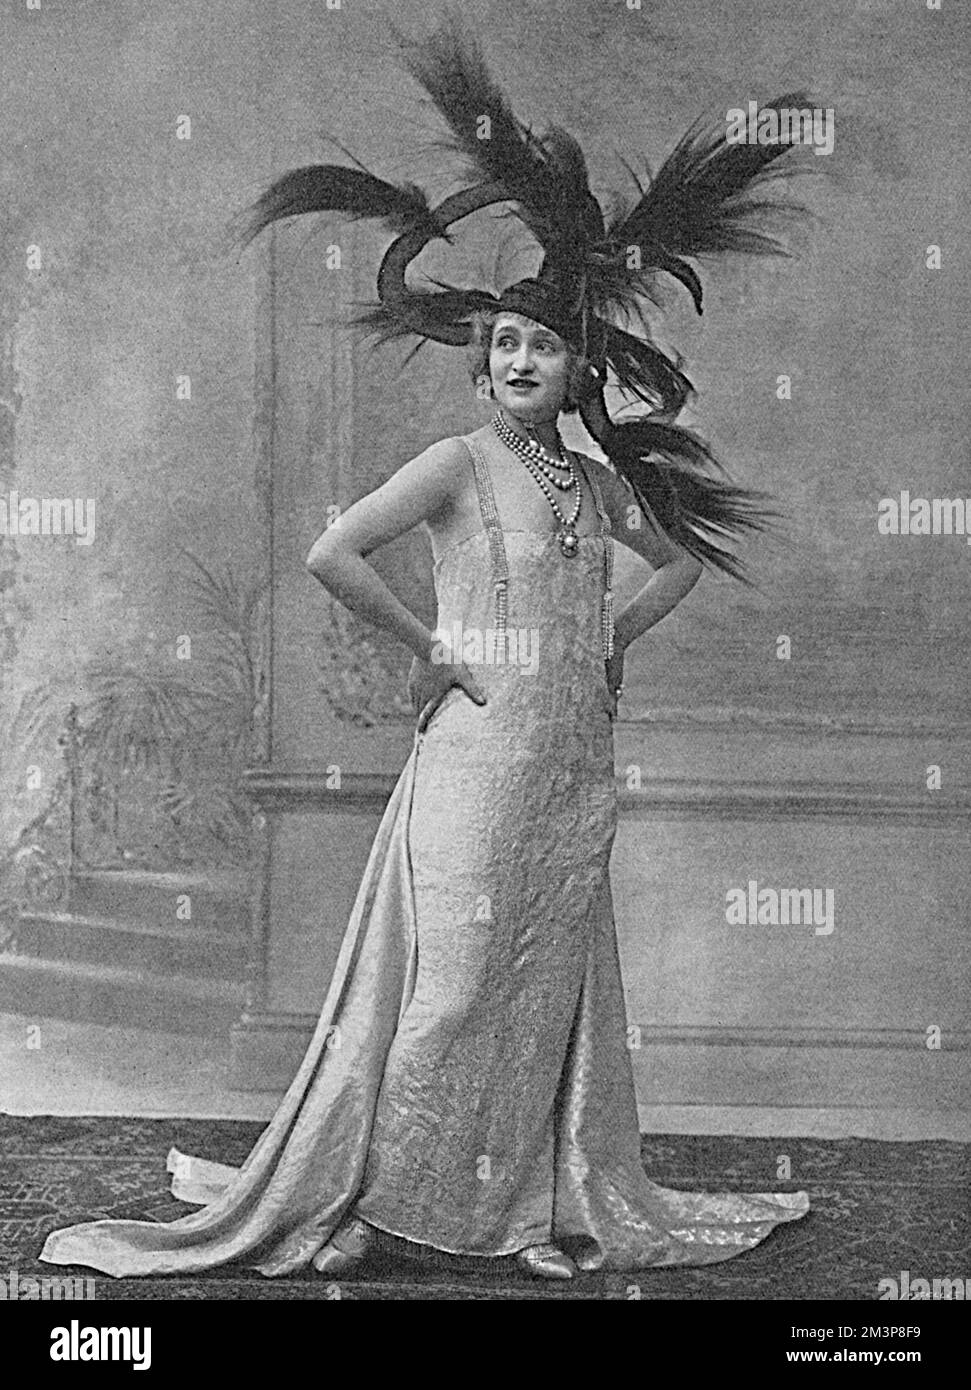 Gaby Deslys (1884 - 1920), French actress, music hall artiste and sometime lover of King Manuel II of Portugal, pictured in 1915 when she was appearing in &quot;5064 Gerrard.&quot;  Known for her magnificent stage costumes, she is wearing a particularly flamboyant headdress.     Date: 1915 Stock Photo